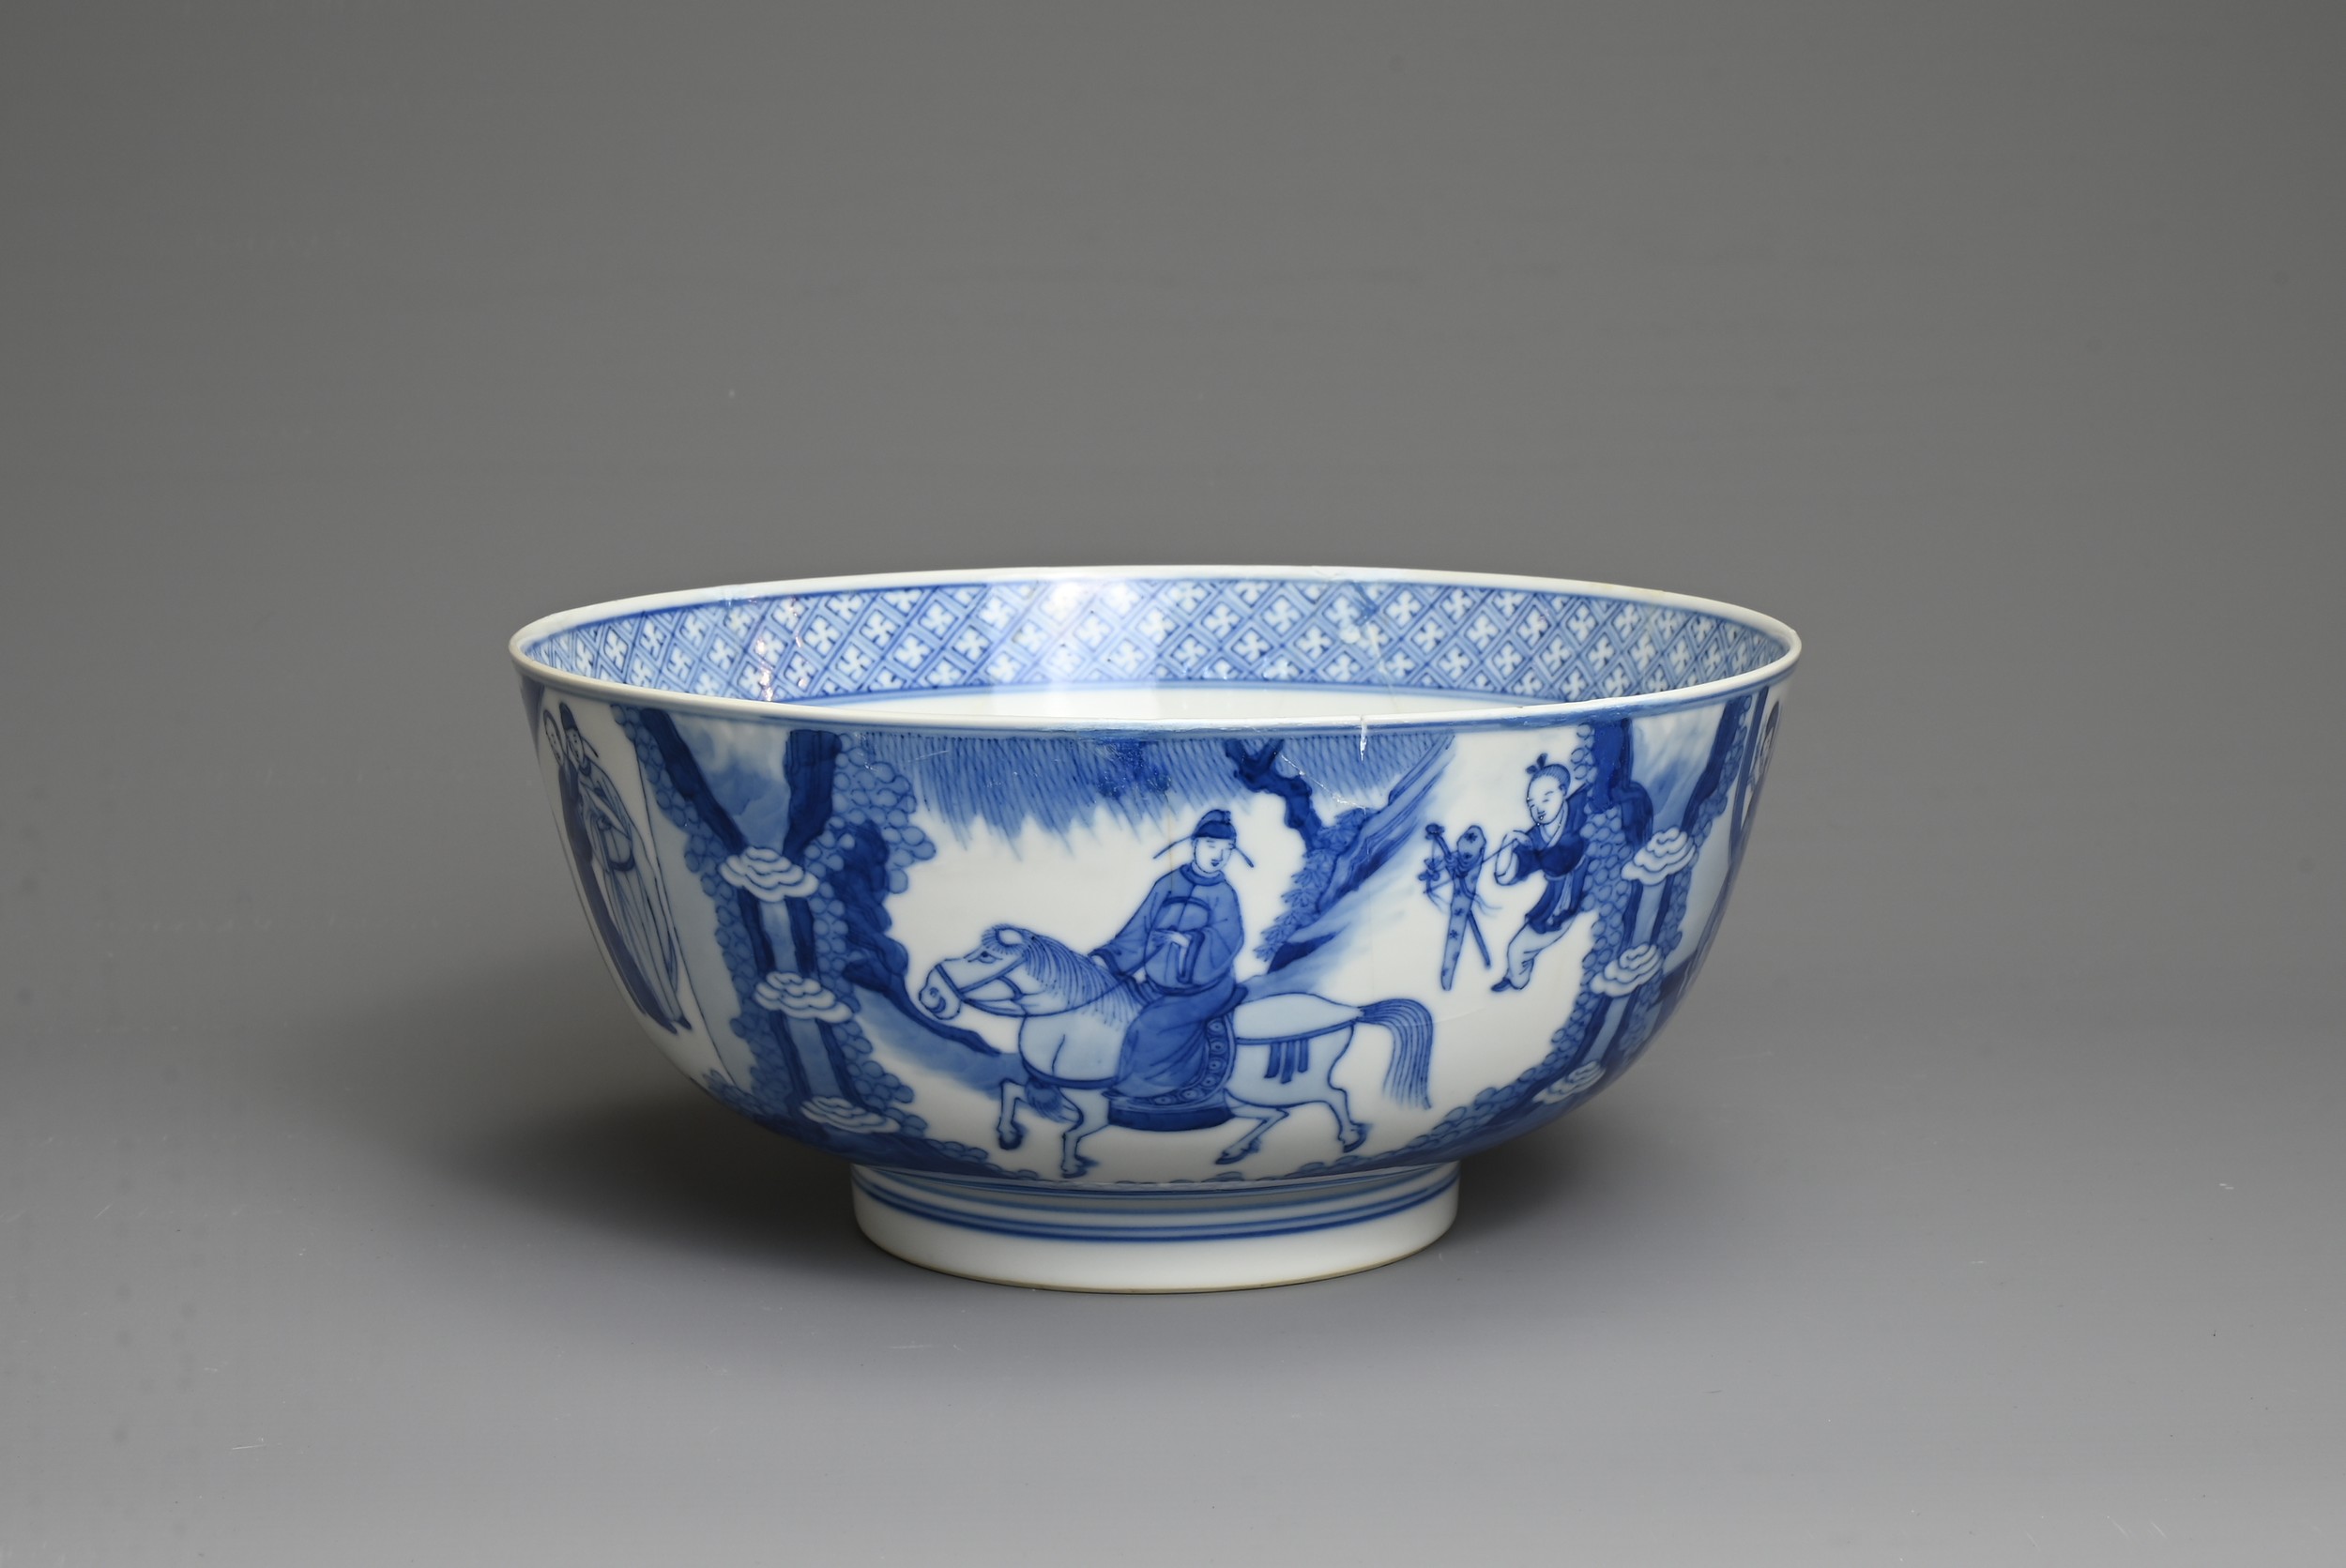 A CHINESE BLUE AND WHITE PORCELAIN BOWL, KANGXI PERIOD. Decorated with scene from the 'Romance of - Image 5 of 9